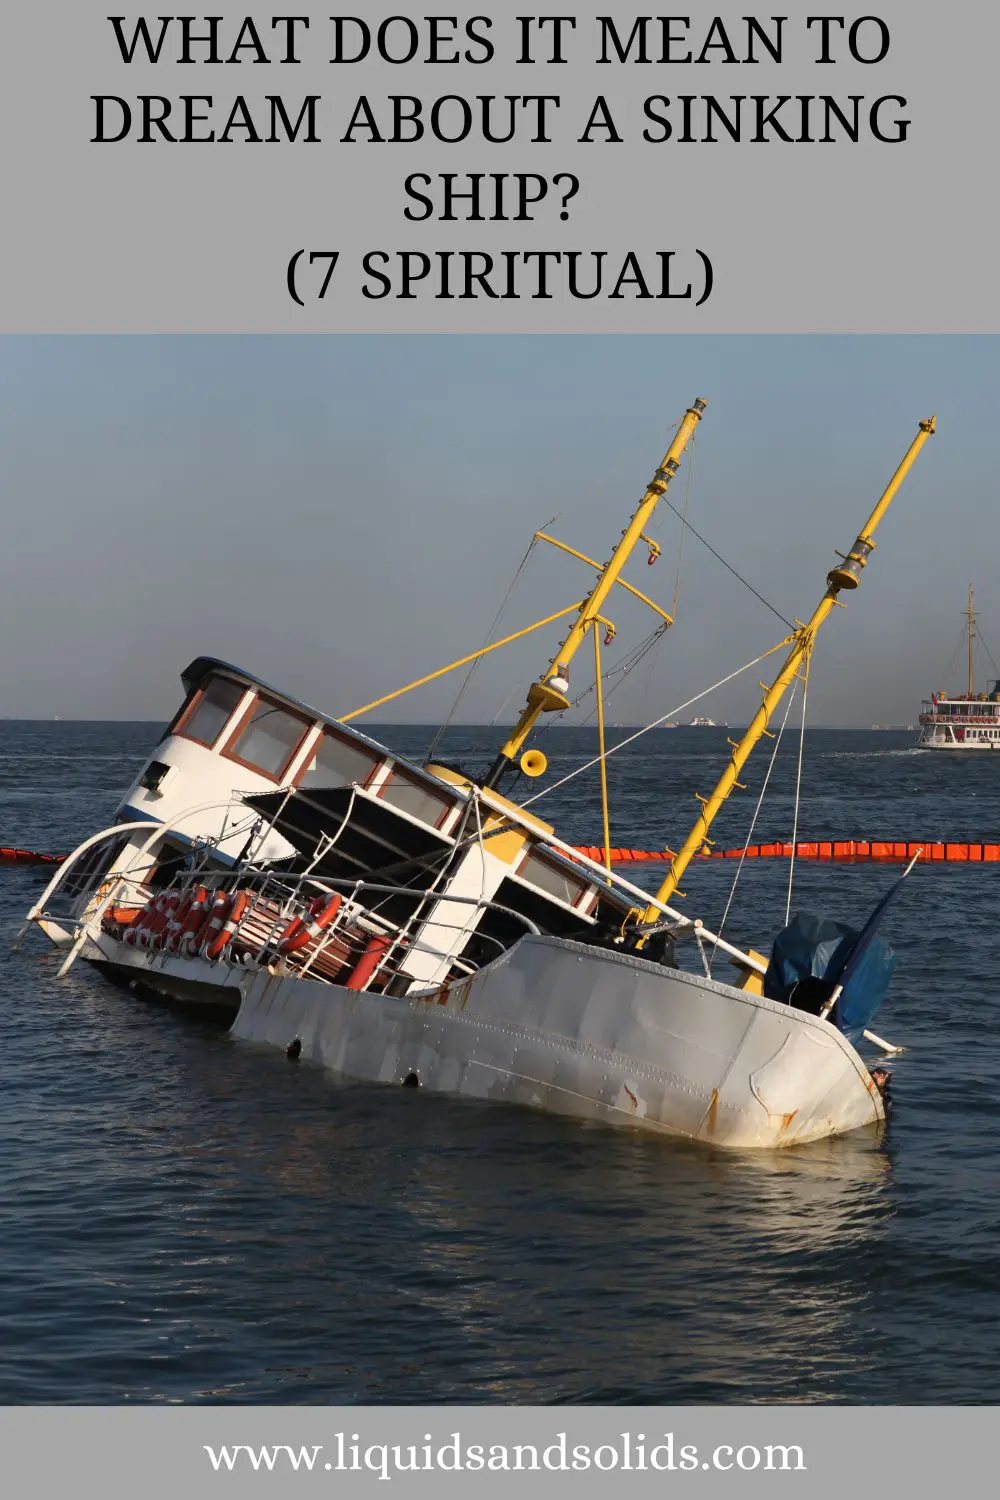 What Is The Spiritual Meaning Of A Dream Of Boat Sinking?